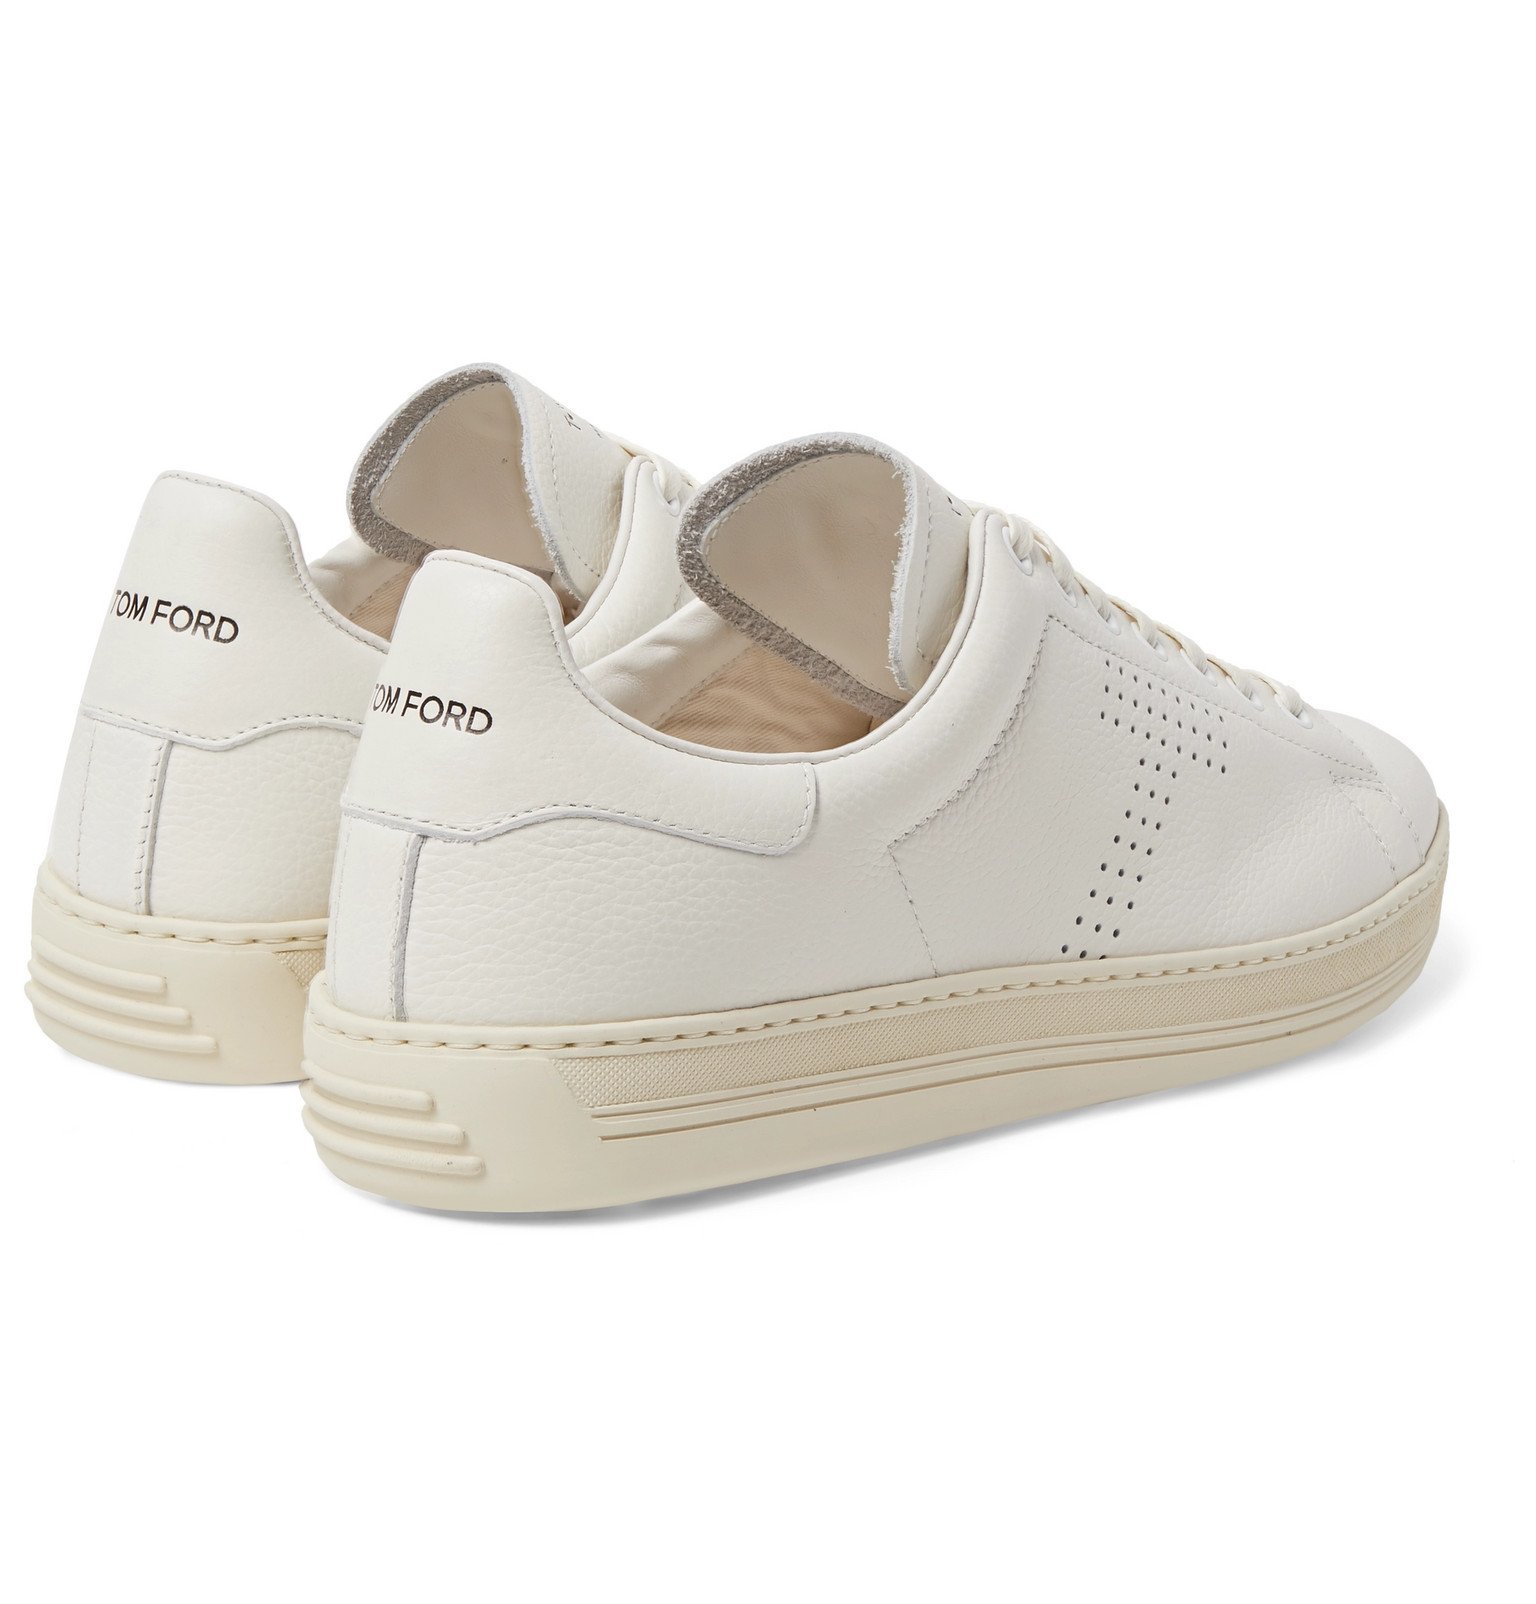 TOM FORD - Warwick Perforated Full-Grain Leather Sneakers - White 